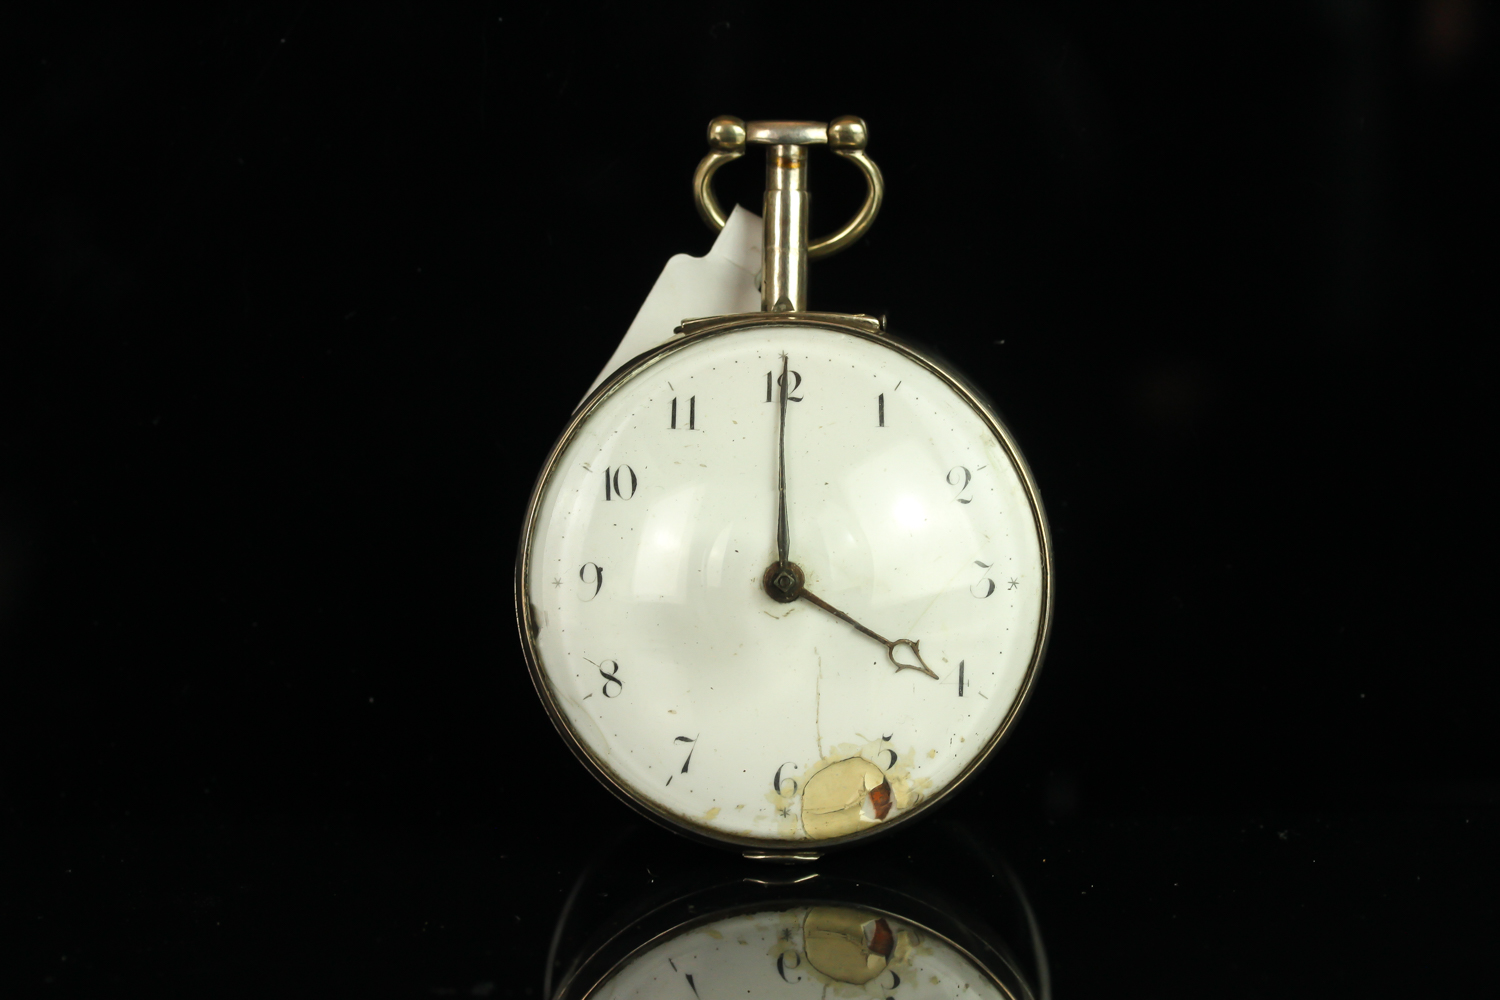 SILVER OPEN FACED POCKET WATCH, round, white porcelain dial with black hands, black arabic markers, - Image 3 of 4